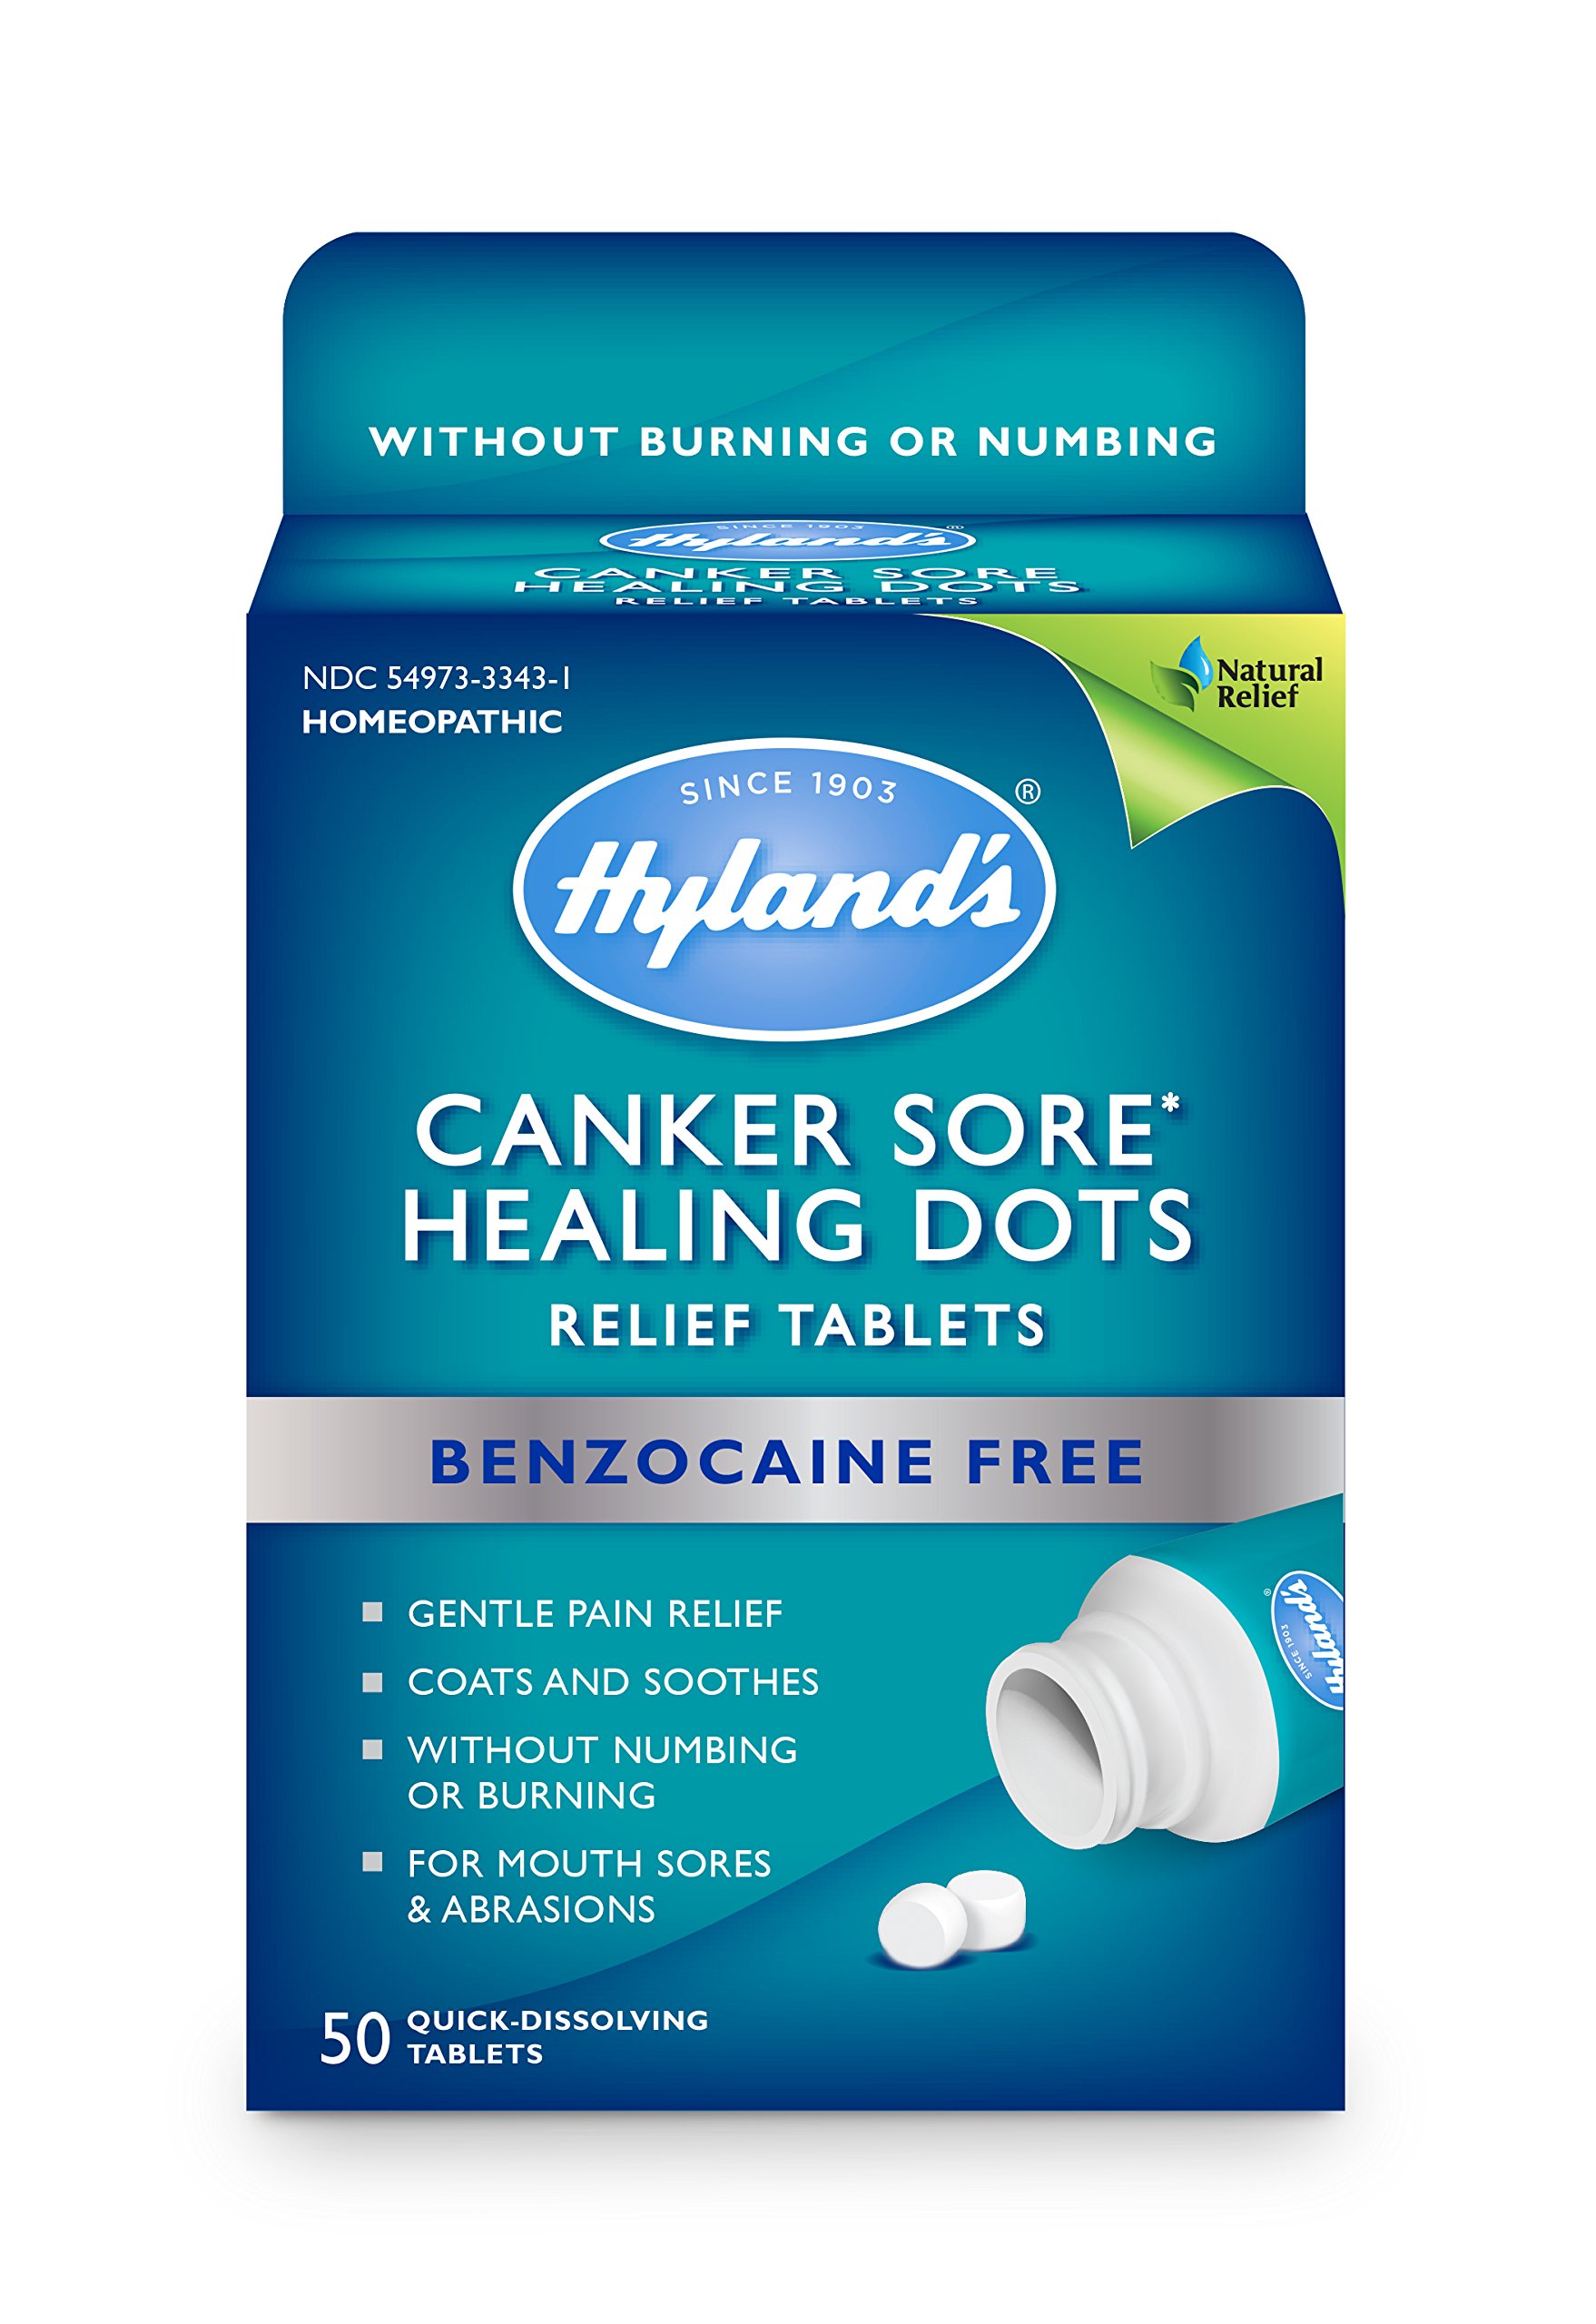 Canker Sore Relief Treatment by Hyland's, Quick Dissolving, Fast Natural Pain Relief of Mouth Ulcers and Oral Irritation, Healing Dots Tablets, 50 Count